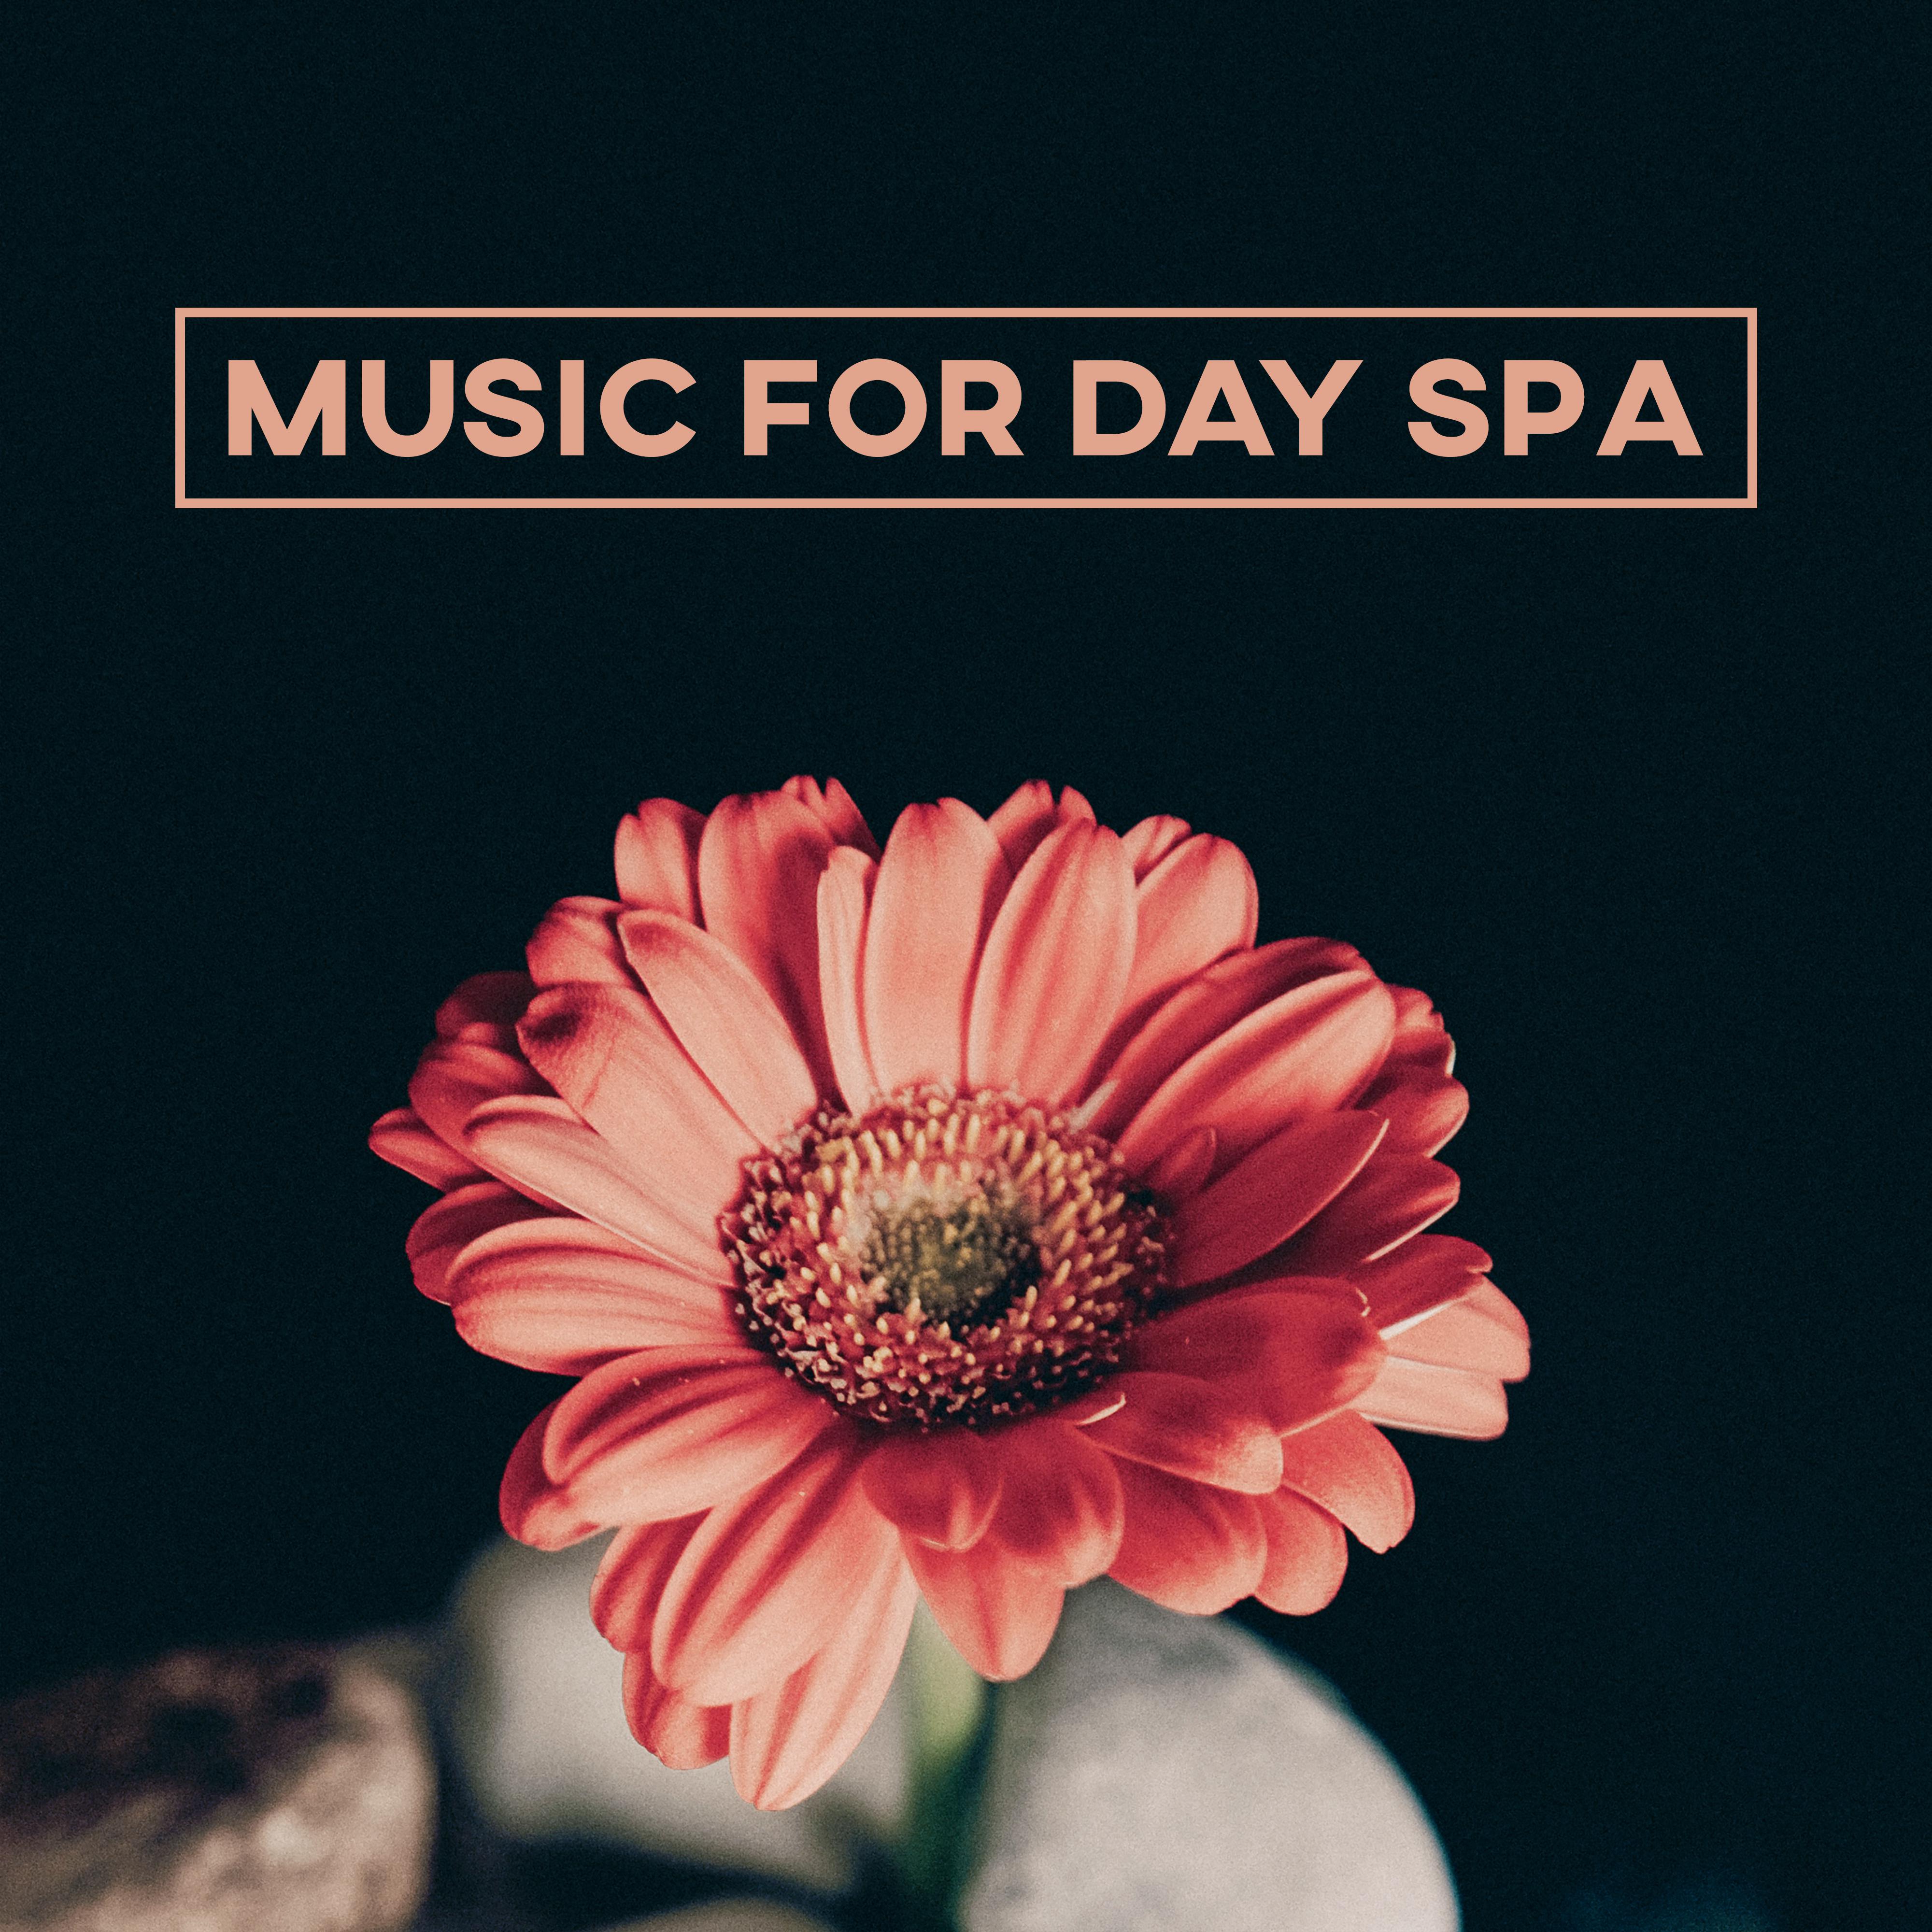 Music for Day Spa – Sensual Nature Sounds for Relax While Massage, Spa Music, Pure Relax, Sensitive Spa, Classic Massage, Hot Stone Massage, Chocolate Massage